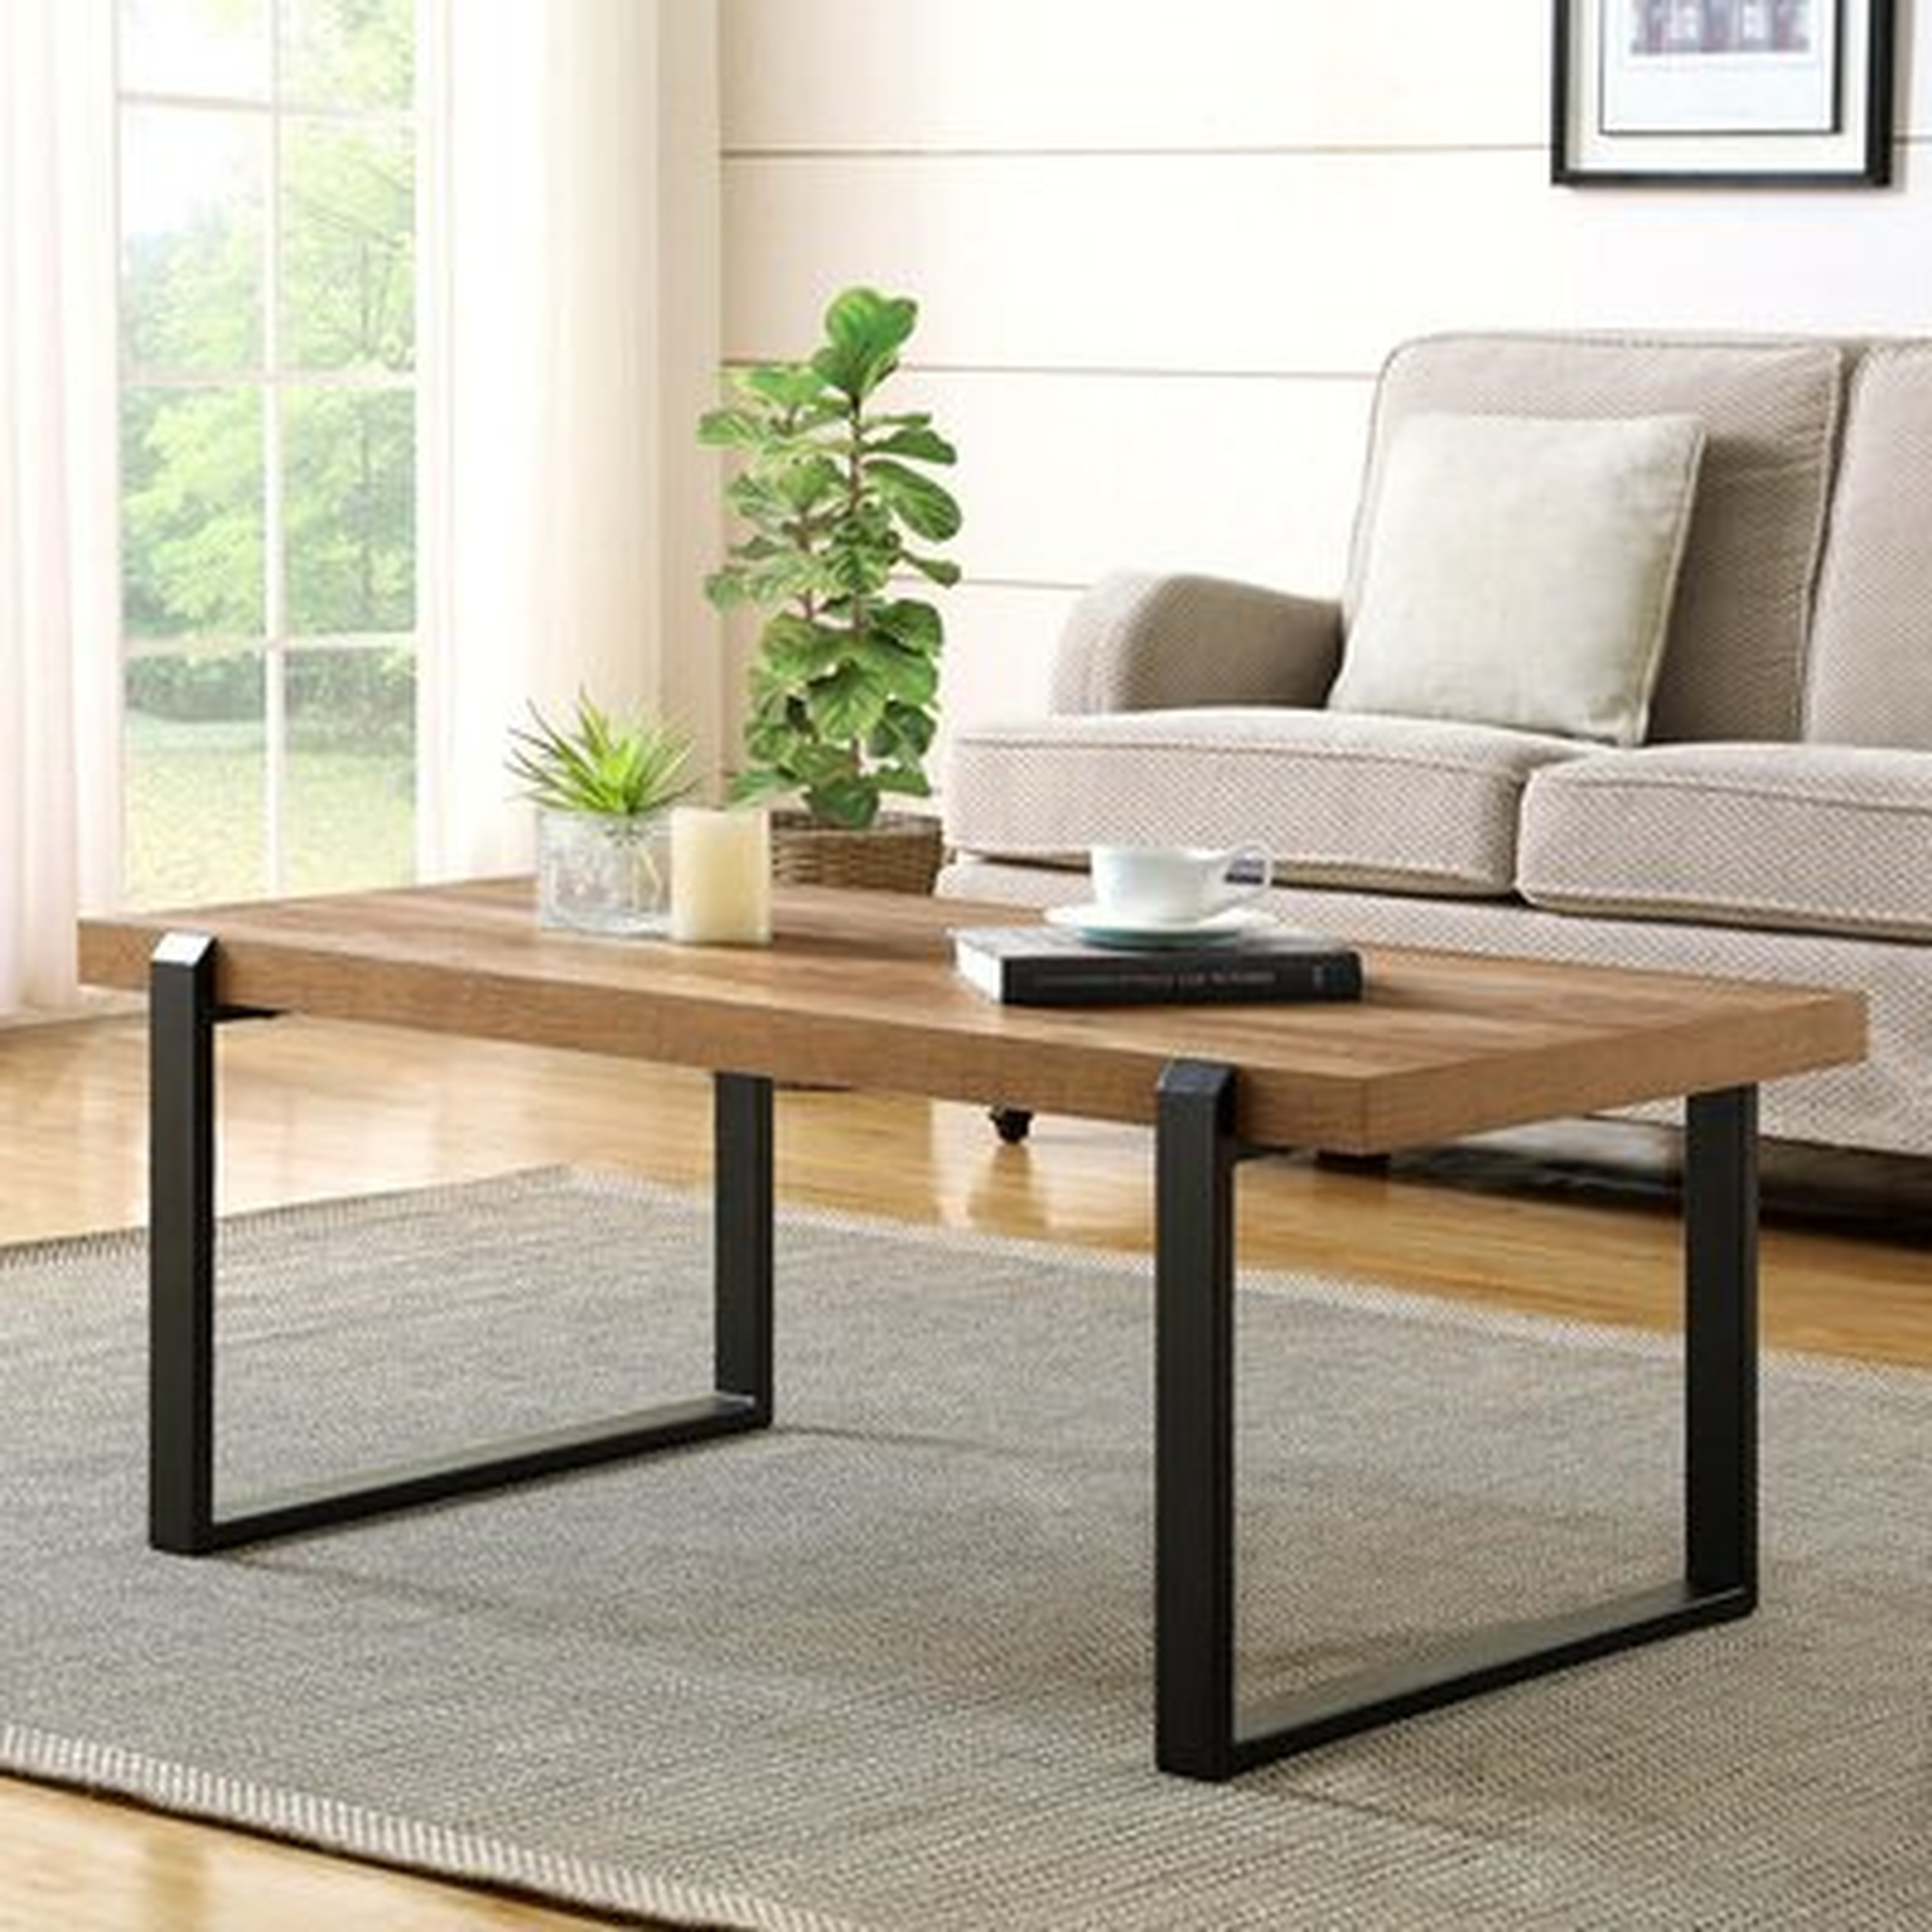 Rustic Coffee Table,Wood And Metal Industrial Cocktail Table For Living Room - Wayfair